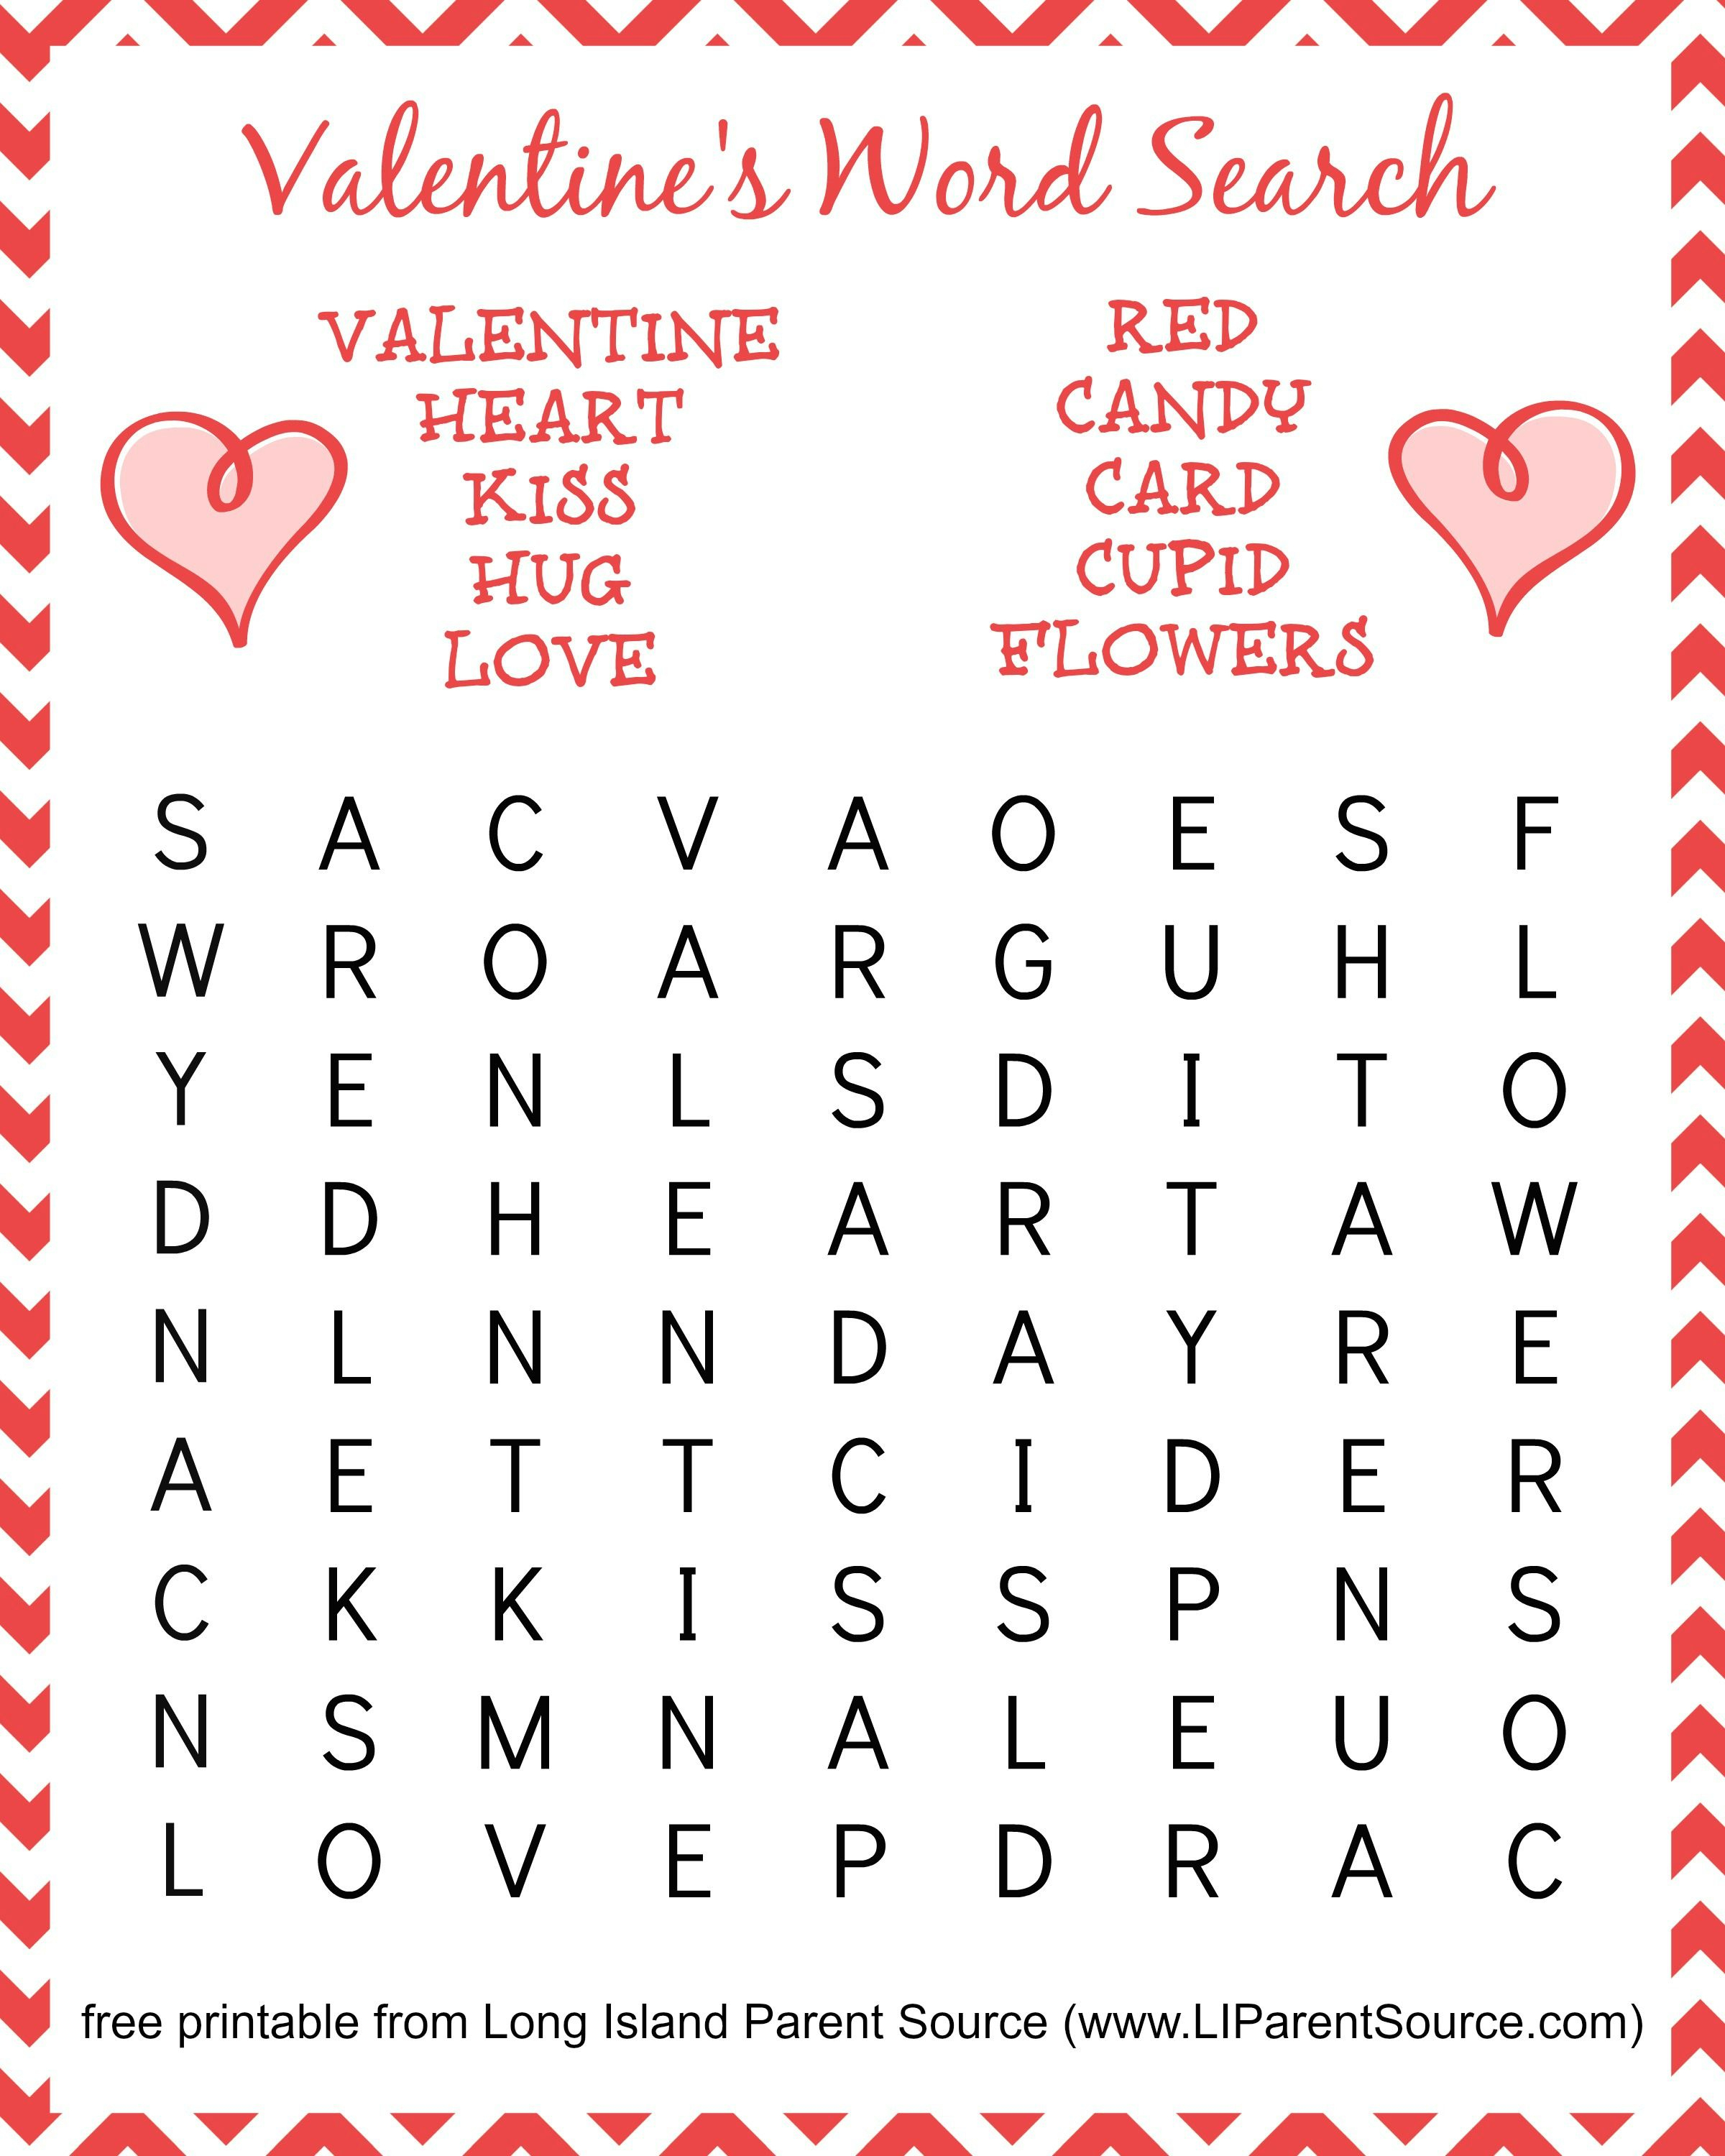 Perfect For Kids - They Will Love Looking For Their Favorite Words - Free Printable Valentine Games For Adults